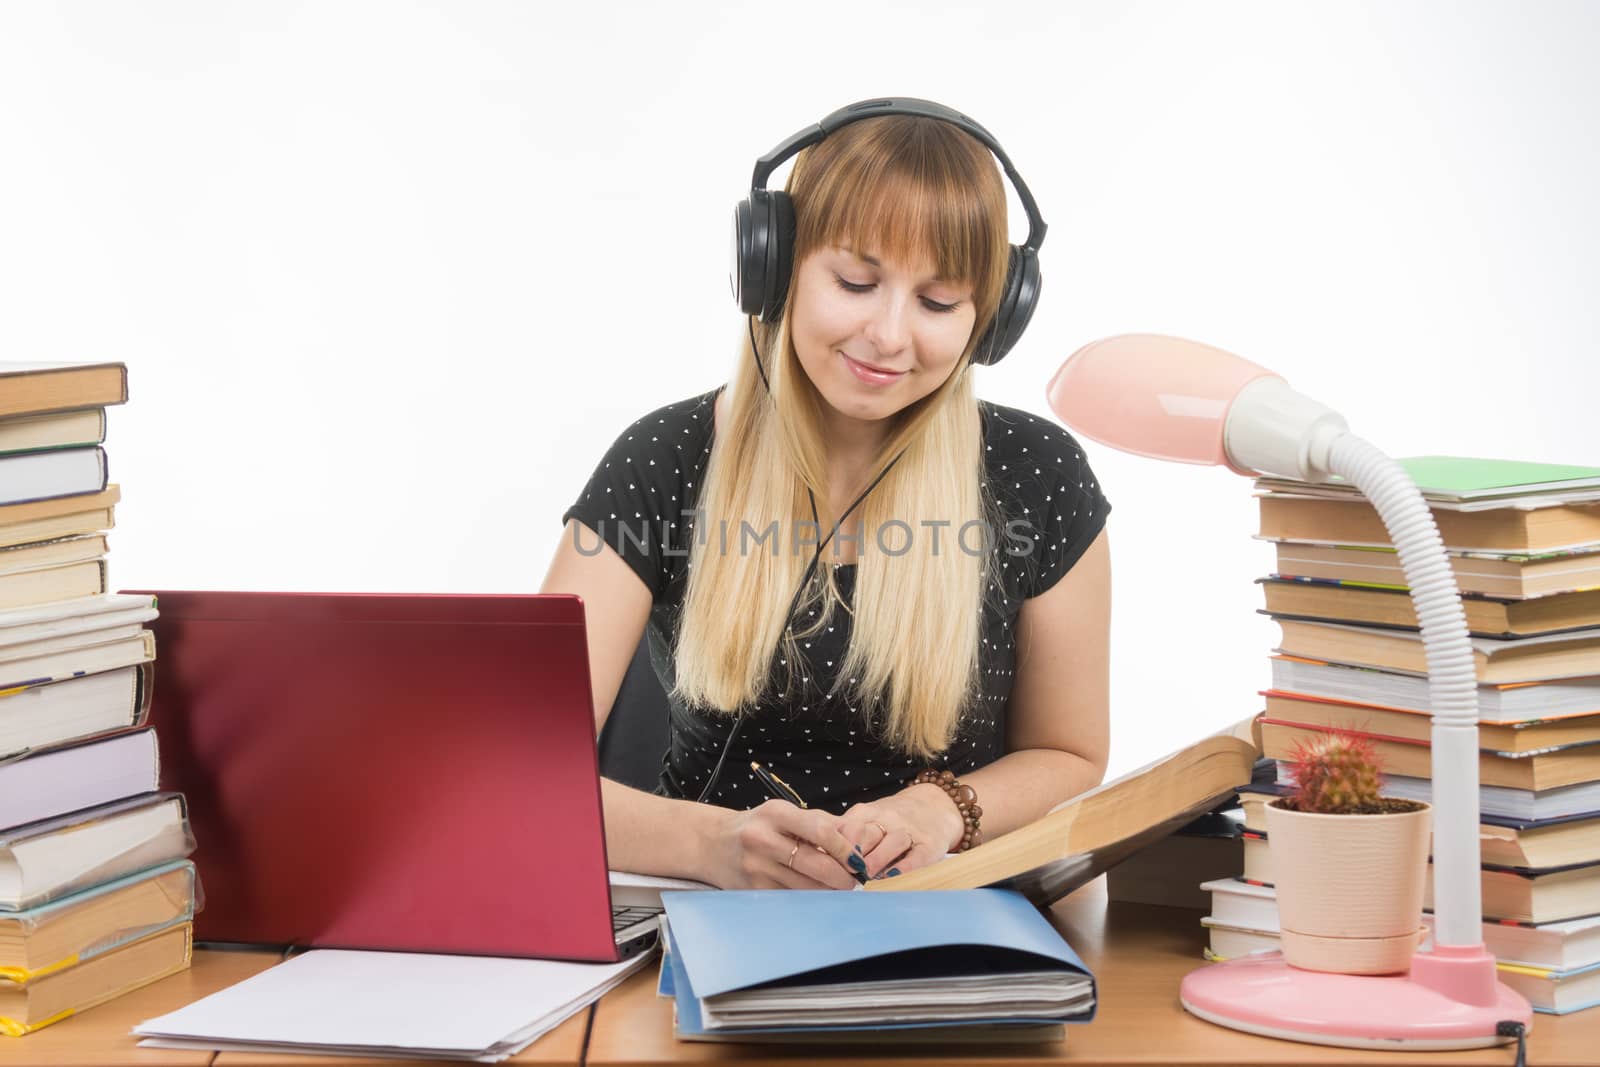 Student listening to music on headphones engaged in preparing for the exam by Madhourse